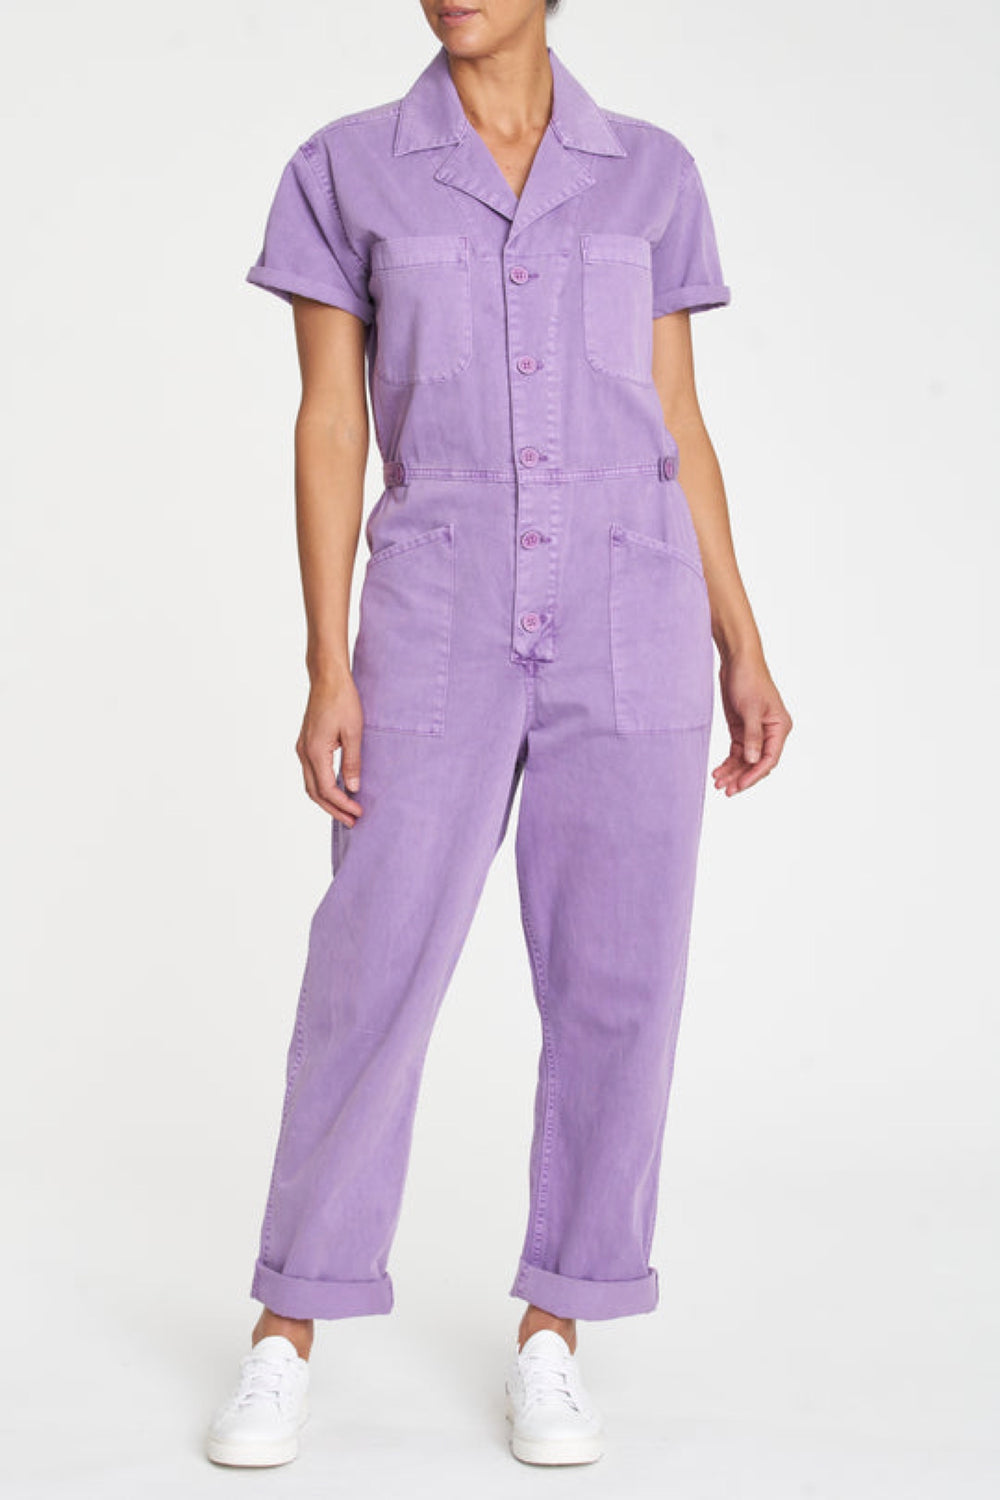 Orchid Grover Field Suit